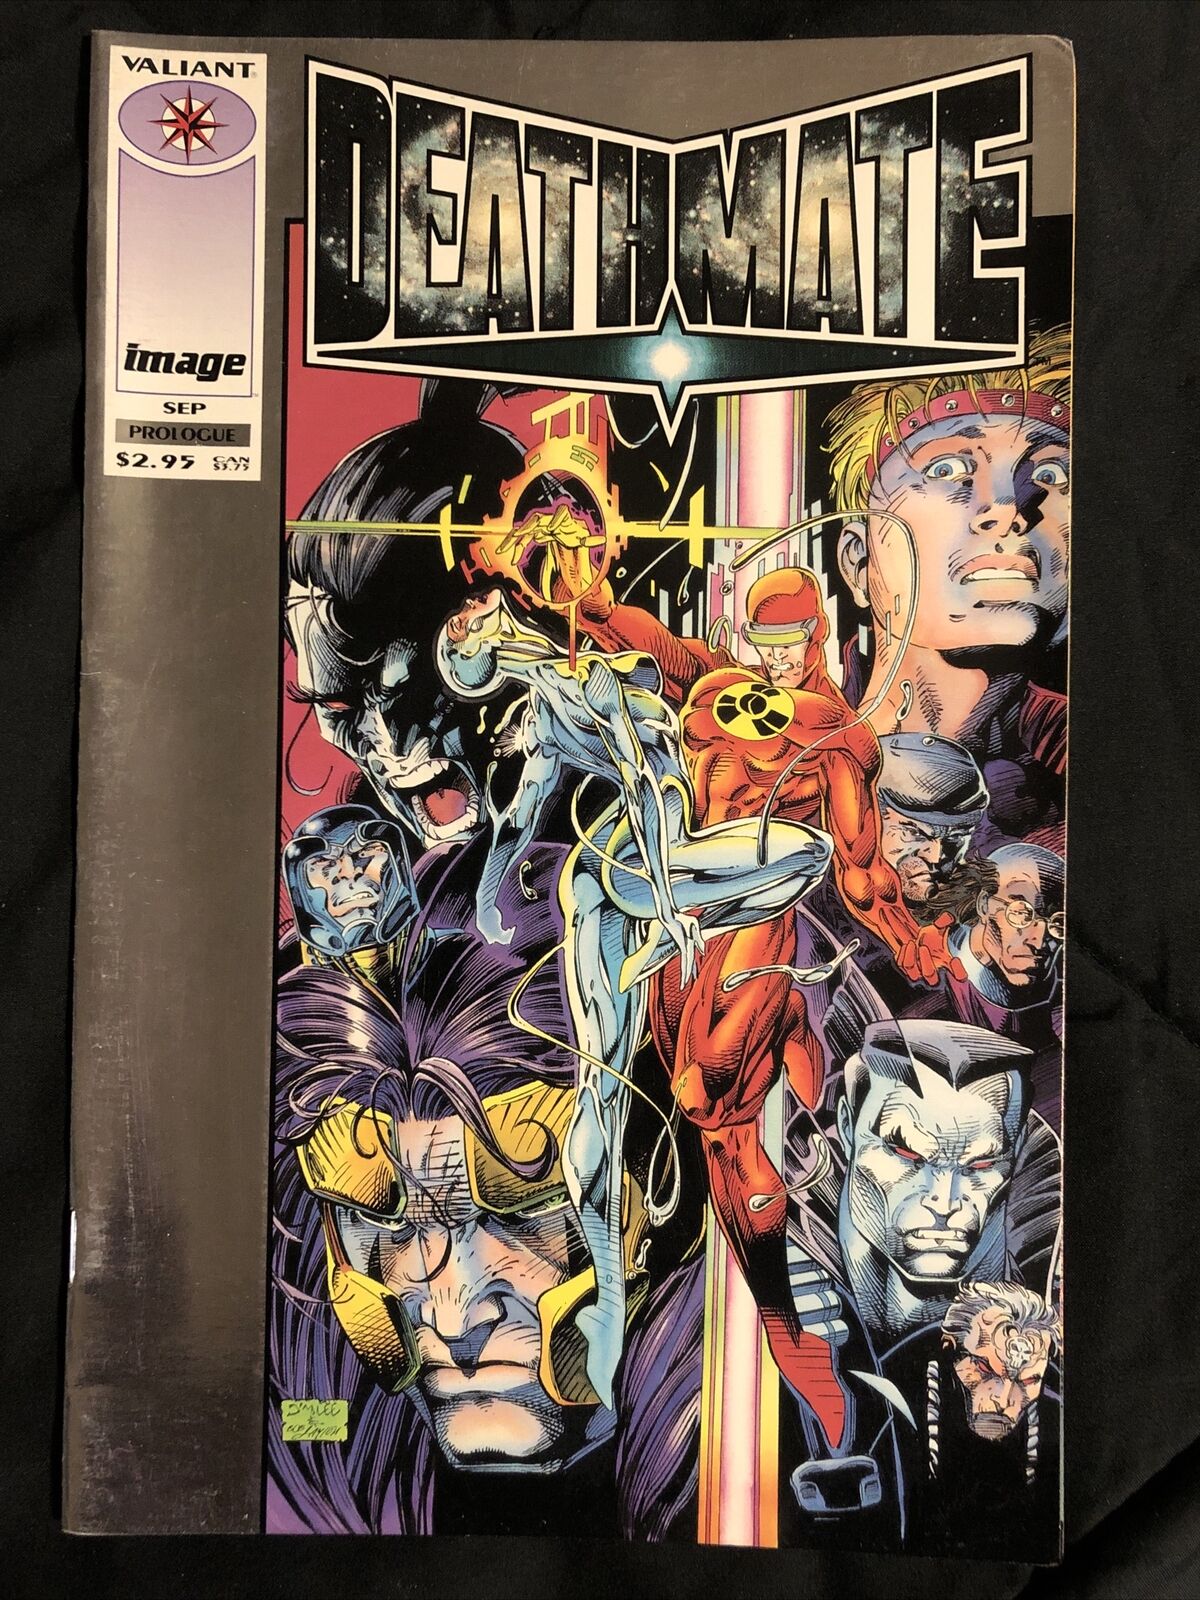 Valiant Entertainment DEATHMATE Comic Book September 1993 Issue Prologue